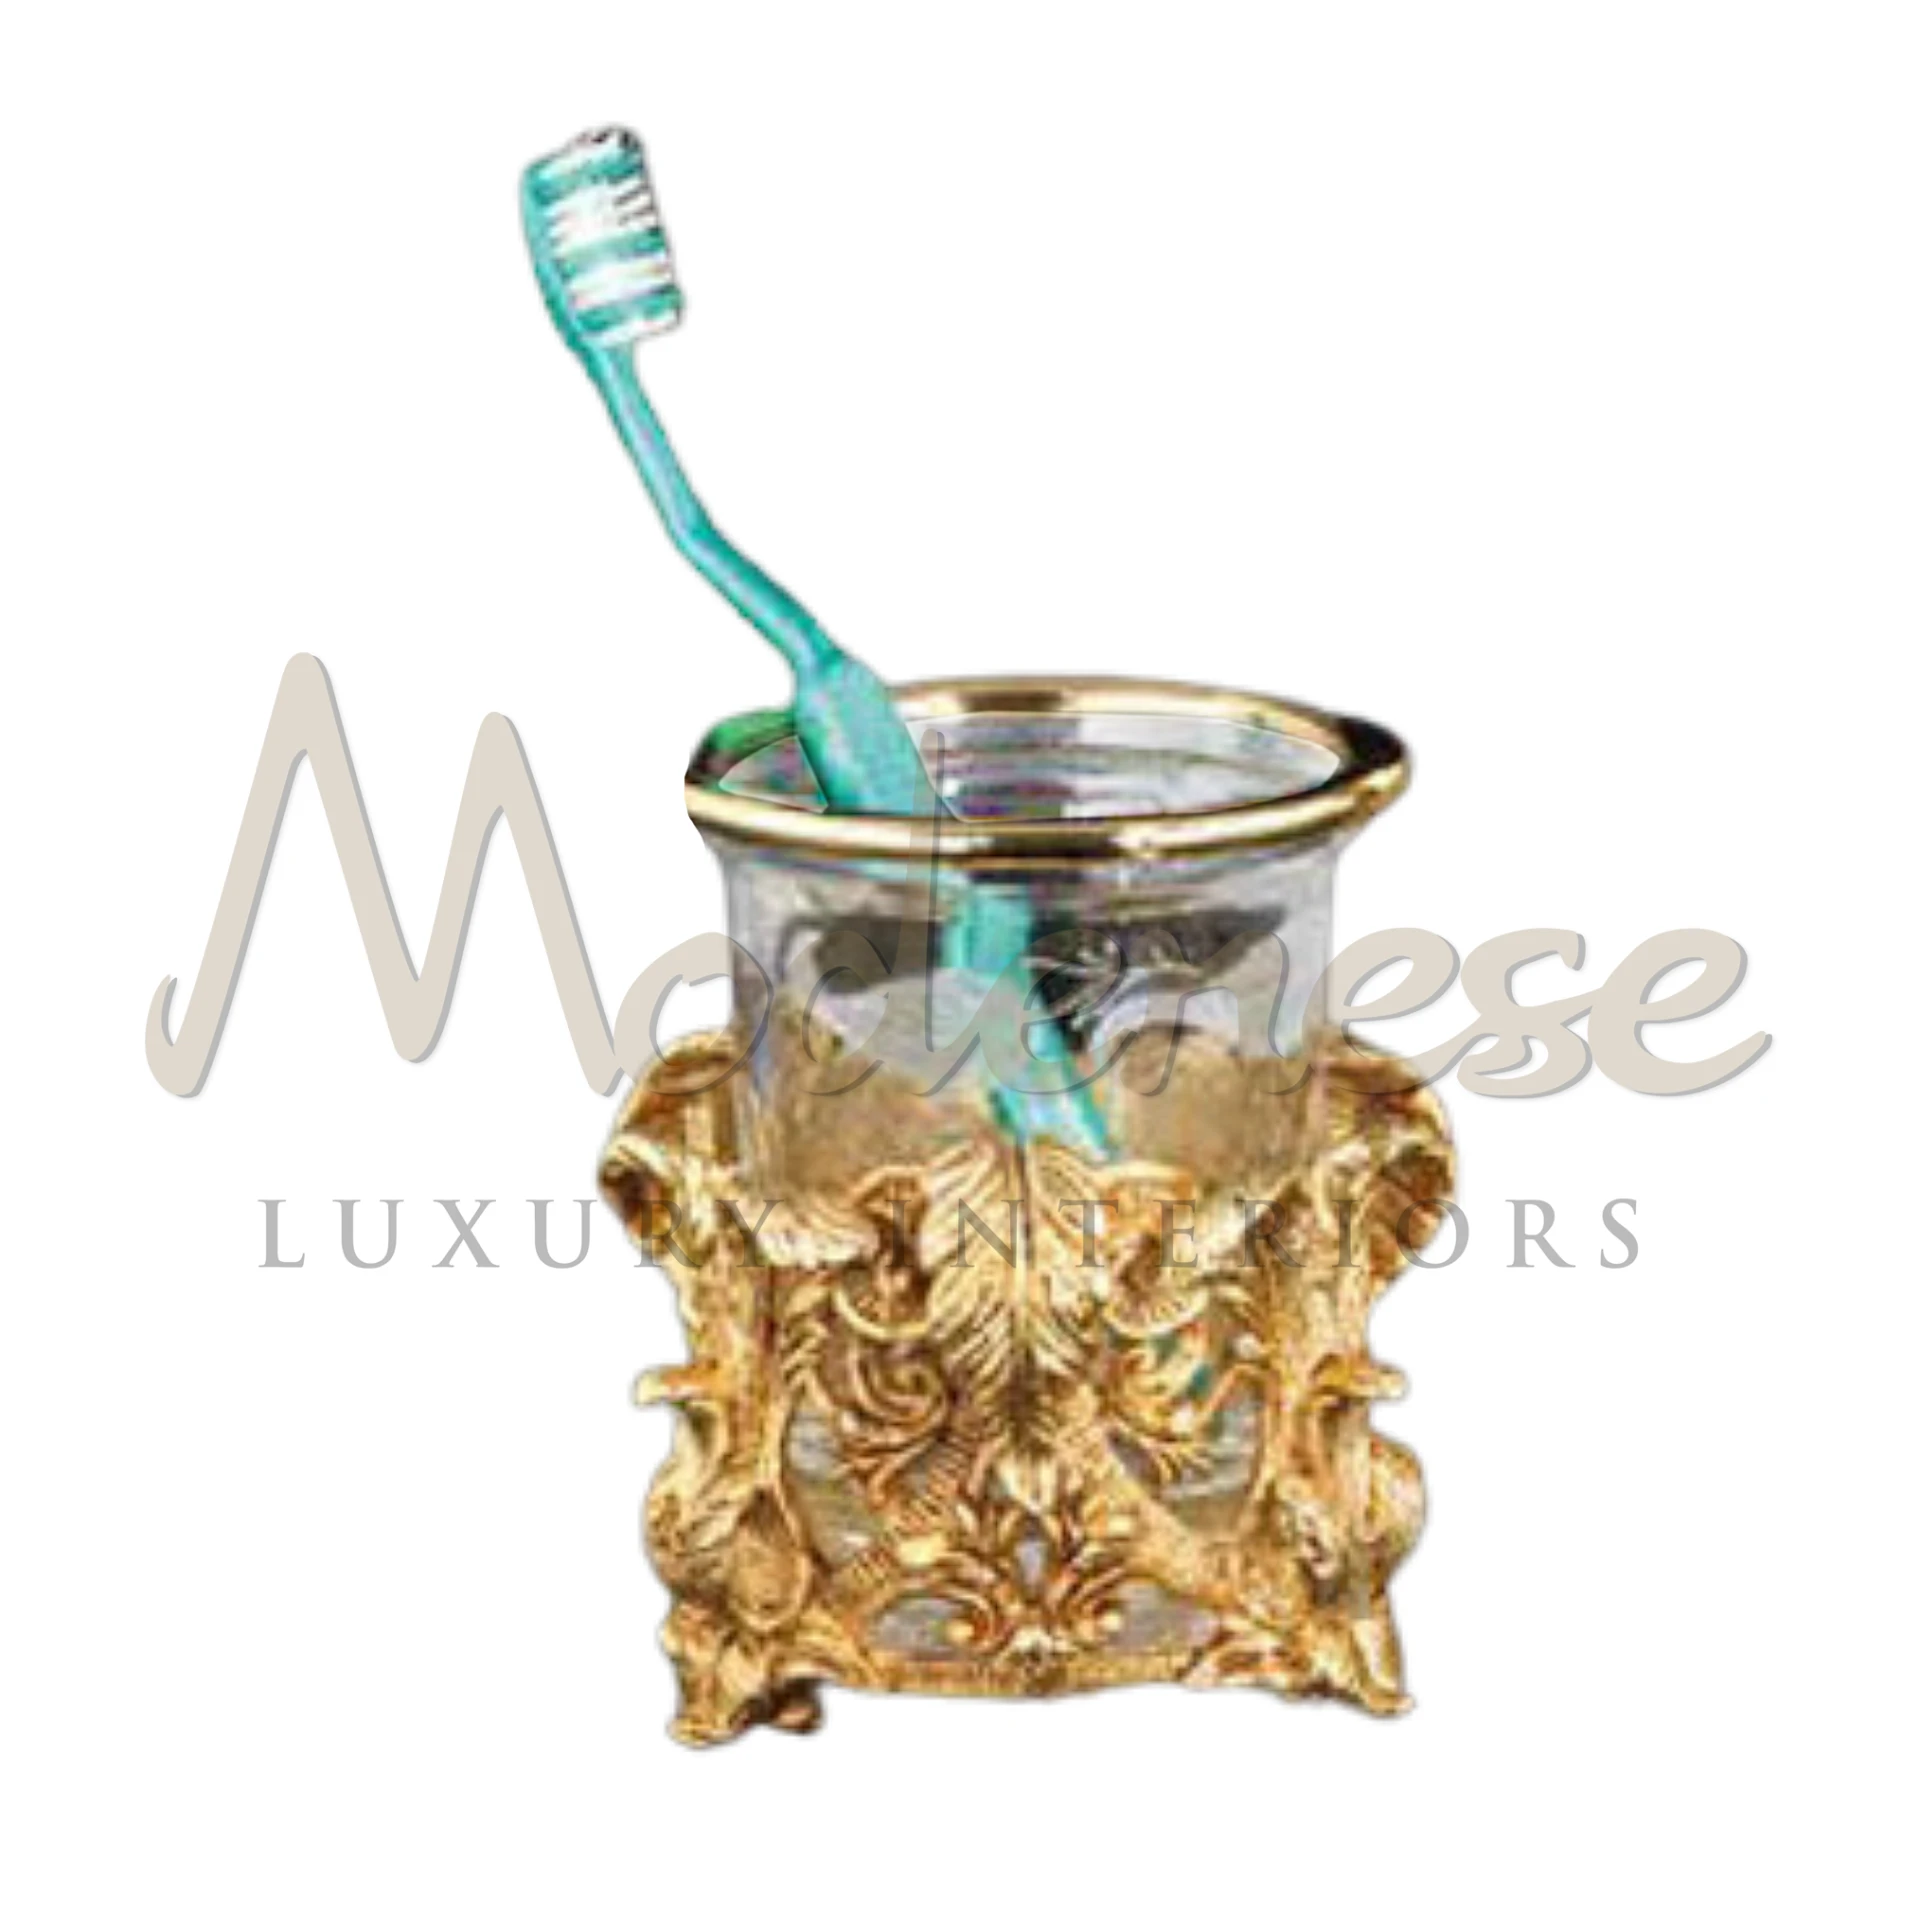 Luxury Gold Toothbrush Holder, crafted from high-quality materials with a gold finish, offering elegance and organization to any bathroom interior.






